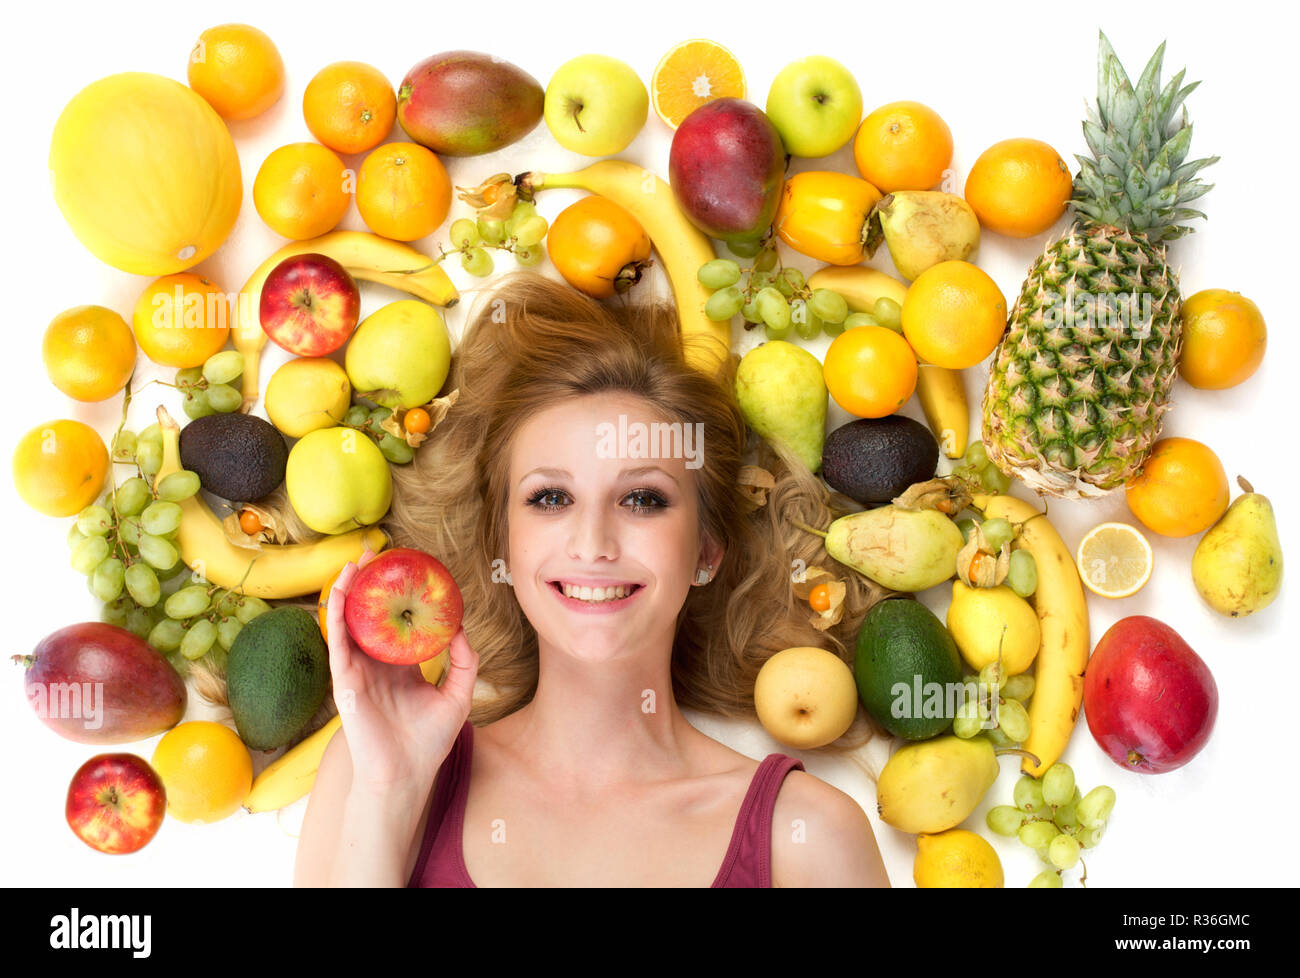 woman surrounded by fruit Stock Photo